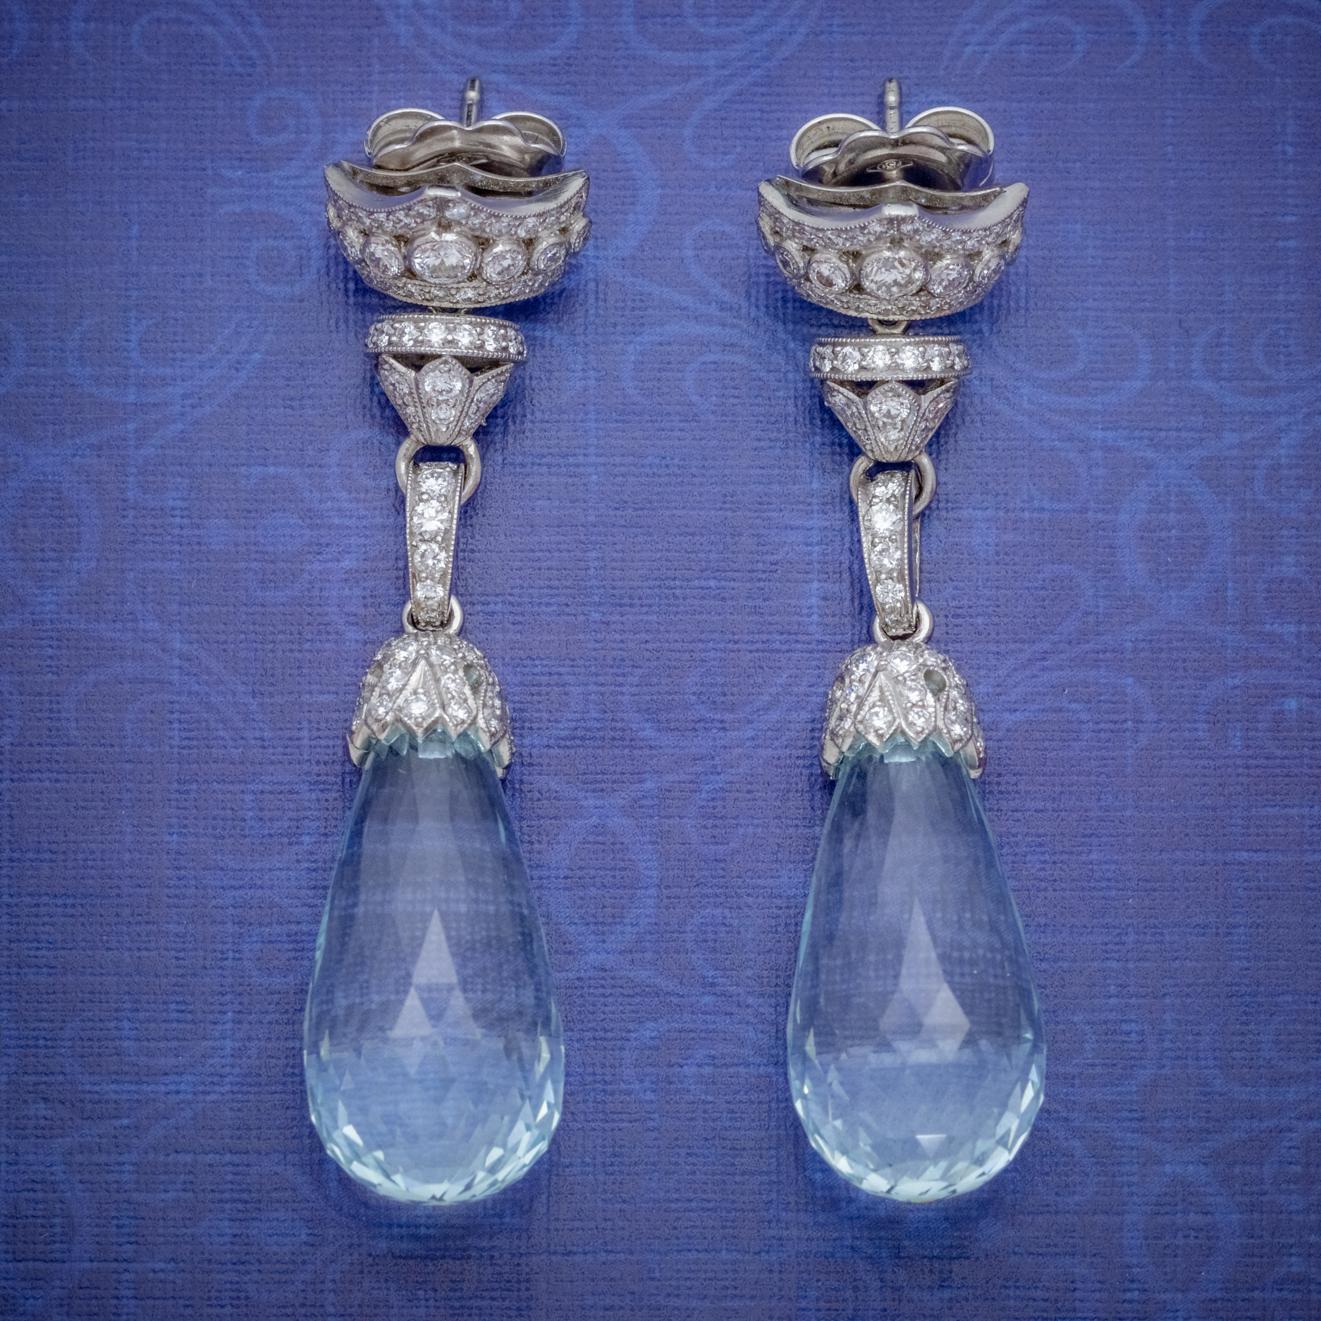 These Spectacular drop earrings are set with stunning Briolette cut Aquamarine droppers which are a lovely clear ocean blue colour and glisten beautifully in the light with many expertly cut facets that are truly magnificent.

The rest of the